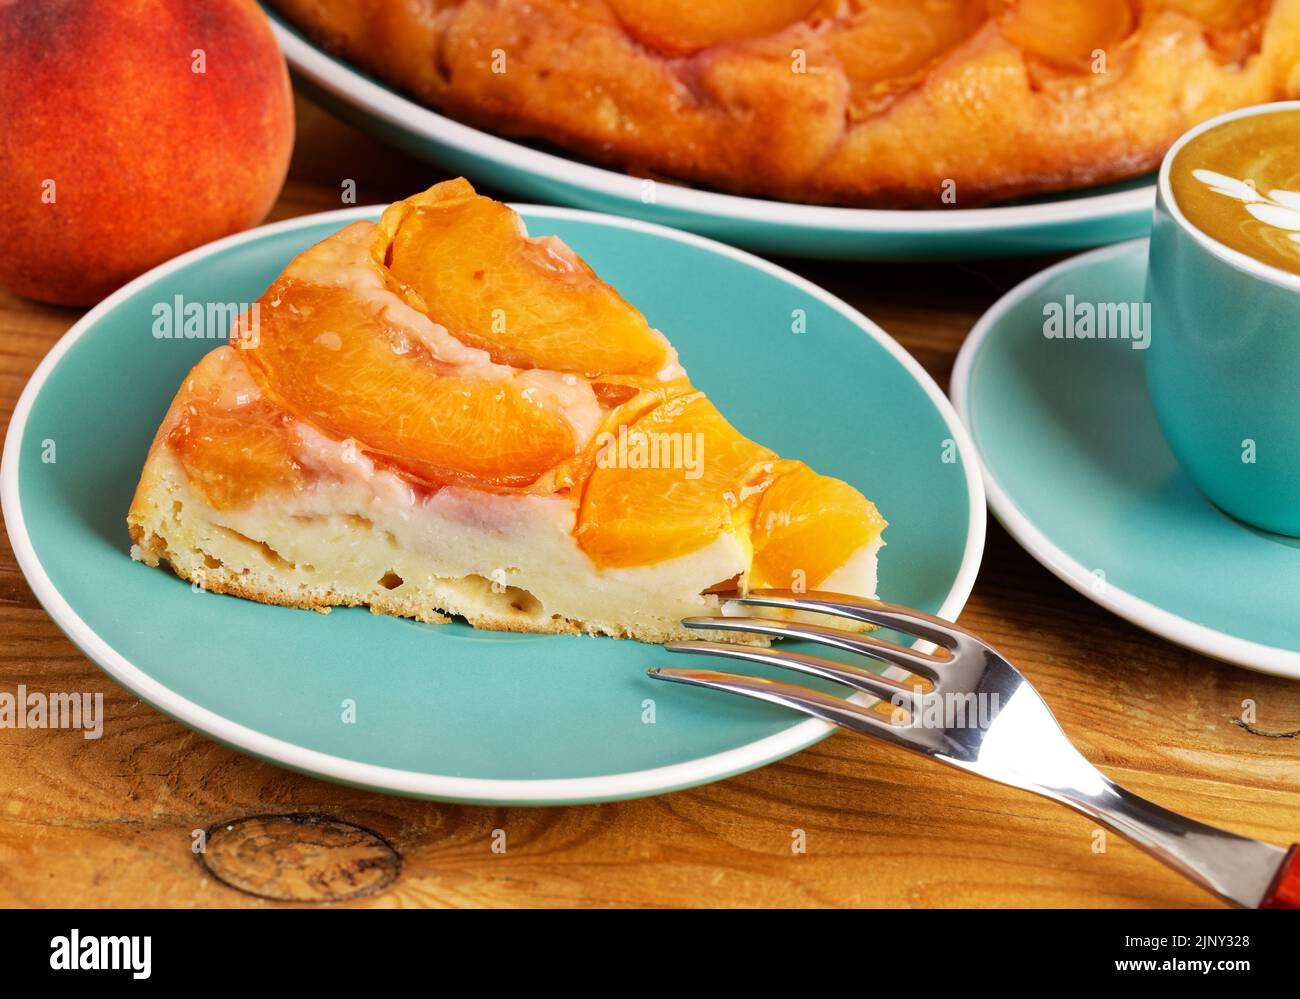 Piece of homemade pie with peaches and cup of coffee on wooden table. Shallow focus. Stock Photo